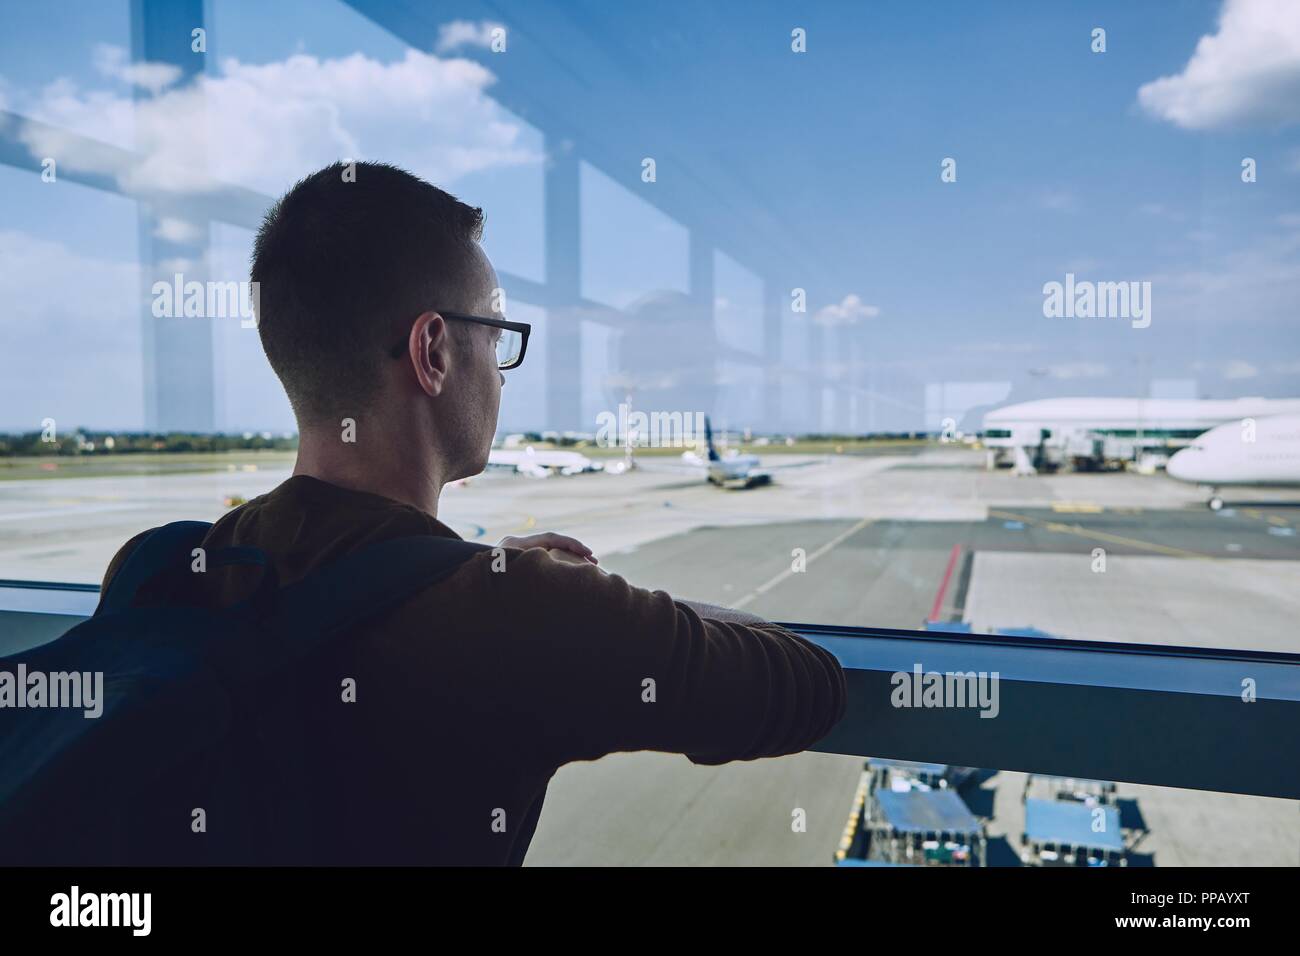 Young passenger waiting at airport and looking through window to airplane. Stock Photo